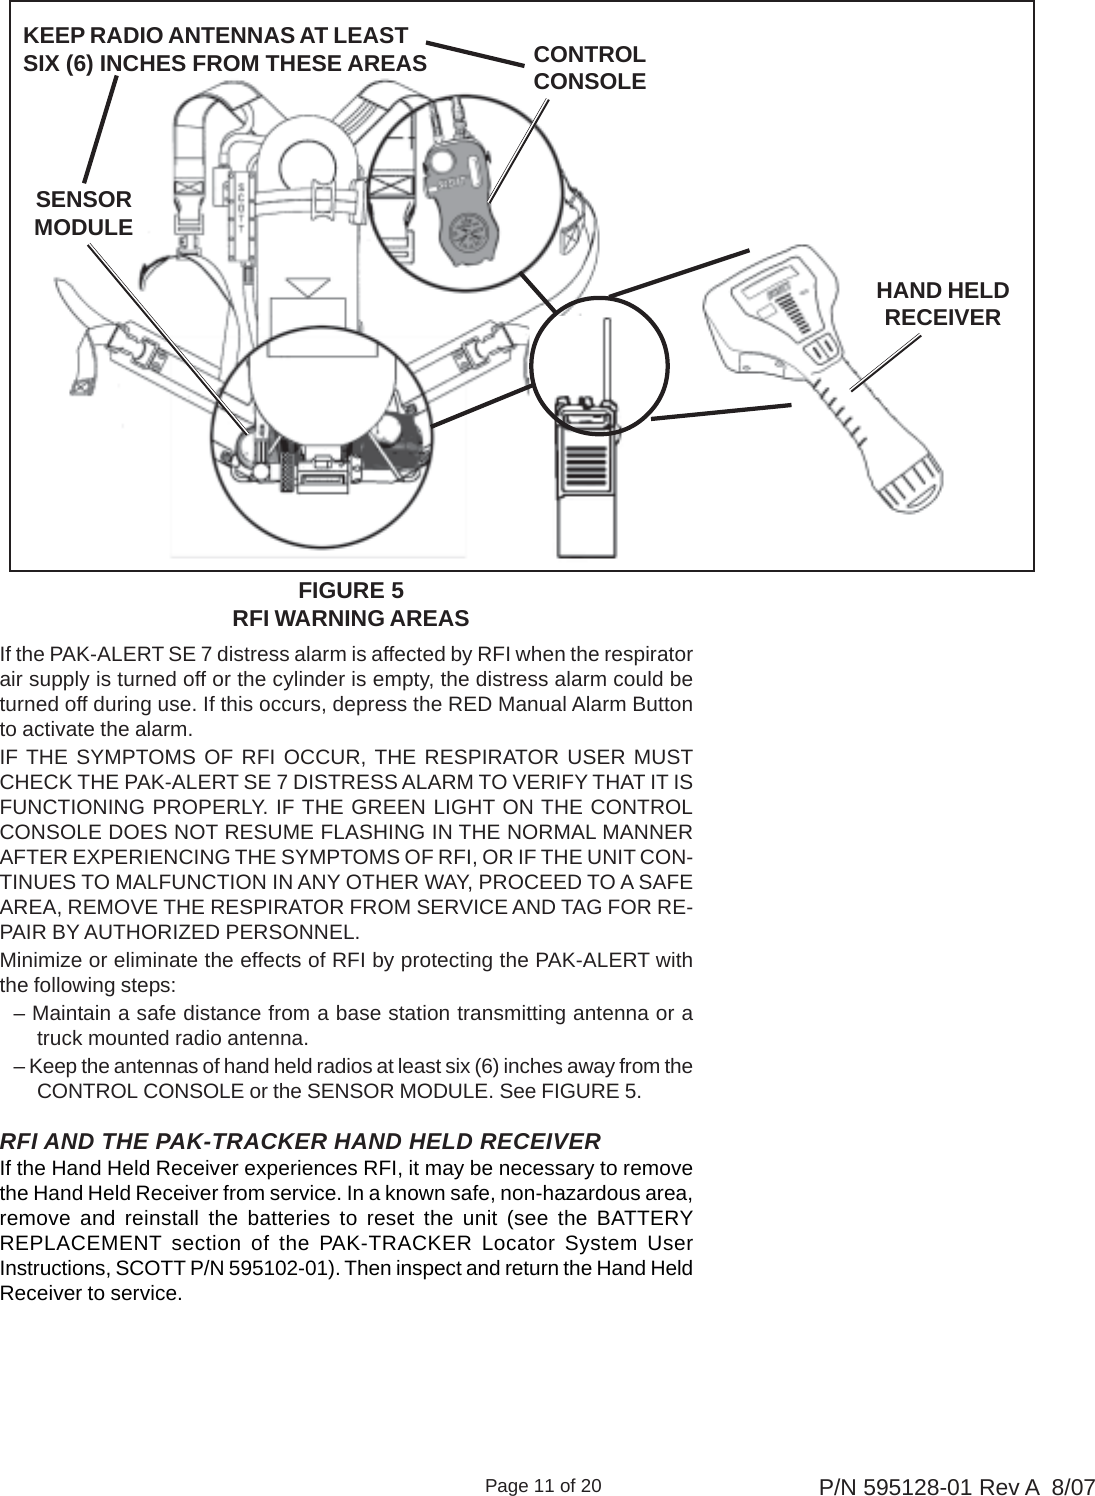 Page 11 of 20 P/N 595128-01 Rev A  8/07If the PAK-ALERT SE 7 distress alarm is affected by RFI when the respiratorair supply is turned off or the cylinder is empty, the distress alarm could beturned off during use. If this occurs, depress the RED Manual Alarm Buttonto activate the alarm.IF THE SYMPTOMS OF RFI OCCUR, THE RESPIRATOR USER MUSTCHECK THE PAK-ALERT SE 7 DISTRESS ALARM TO VERIFY THAT IT ISFUNCTIONING PROPERLY. IF THE GREEN LIGHT ON THE CONTROLCONSOLE DOES NOT RESUME FLASHING IN THE NORMAL MANNERAFTER EXPERIENCING THE SYMPTOMS OF RFI, OR IF THE UNIT CON-TINUES TO MALFUNCTION IN ANY OTHER WAY, PROCEED TO A SAFEAREA, REMOVE THE RESPIRATOR FROM SERVICE AND TAG FOR RE-PAIR BY AUTHORIZED PERSONNEL.Minimize or eliminate the effects of RFI by protecting the PAK-ALERT withthe following steps:– Maintain a safe distance from a base station transmitting antenna or atruck mounted radio antenna.– Keep the antennas of hand held radios at least six (6) inches away from theCONTROL CONSOLE or the SENSOR MODULE. See FIGURE 5.HAND HELDRECEIVERFIGURE 5RFI WARNING AREASSENSORMODULECONTROLCONSOLEKEEP RADIO ANTENNAS AT LEASTSIX (6) INCHES FROM THESE AREASRFI AND THE PAK-TRACKER HAND HELD RECEIVERIf the Hand Held Receiver experiences RFI, it may be necessary to removethe Hand Held Receiver from service. In a known safe, non-hazardous area,remove and reinstall the batteries to reset the unit (see the BATTERYREPLACEMENT section of the PAK-TRACKER Locator System UserInstructions, SCOTT P/N 595102-01). Then inspect and return the Hand HeldReceiver to service.